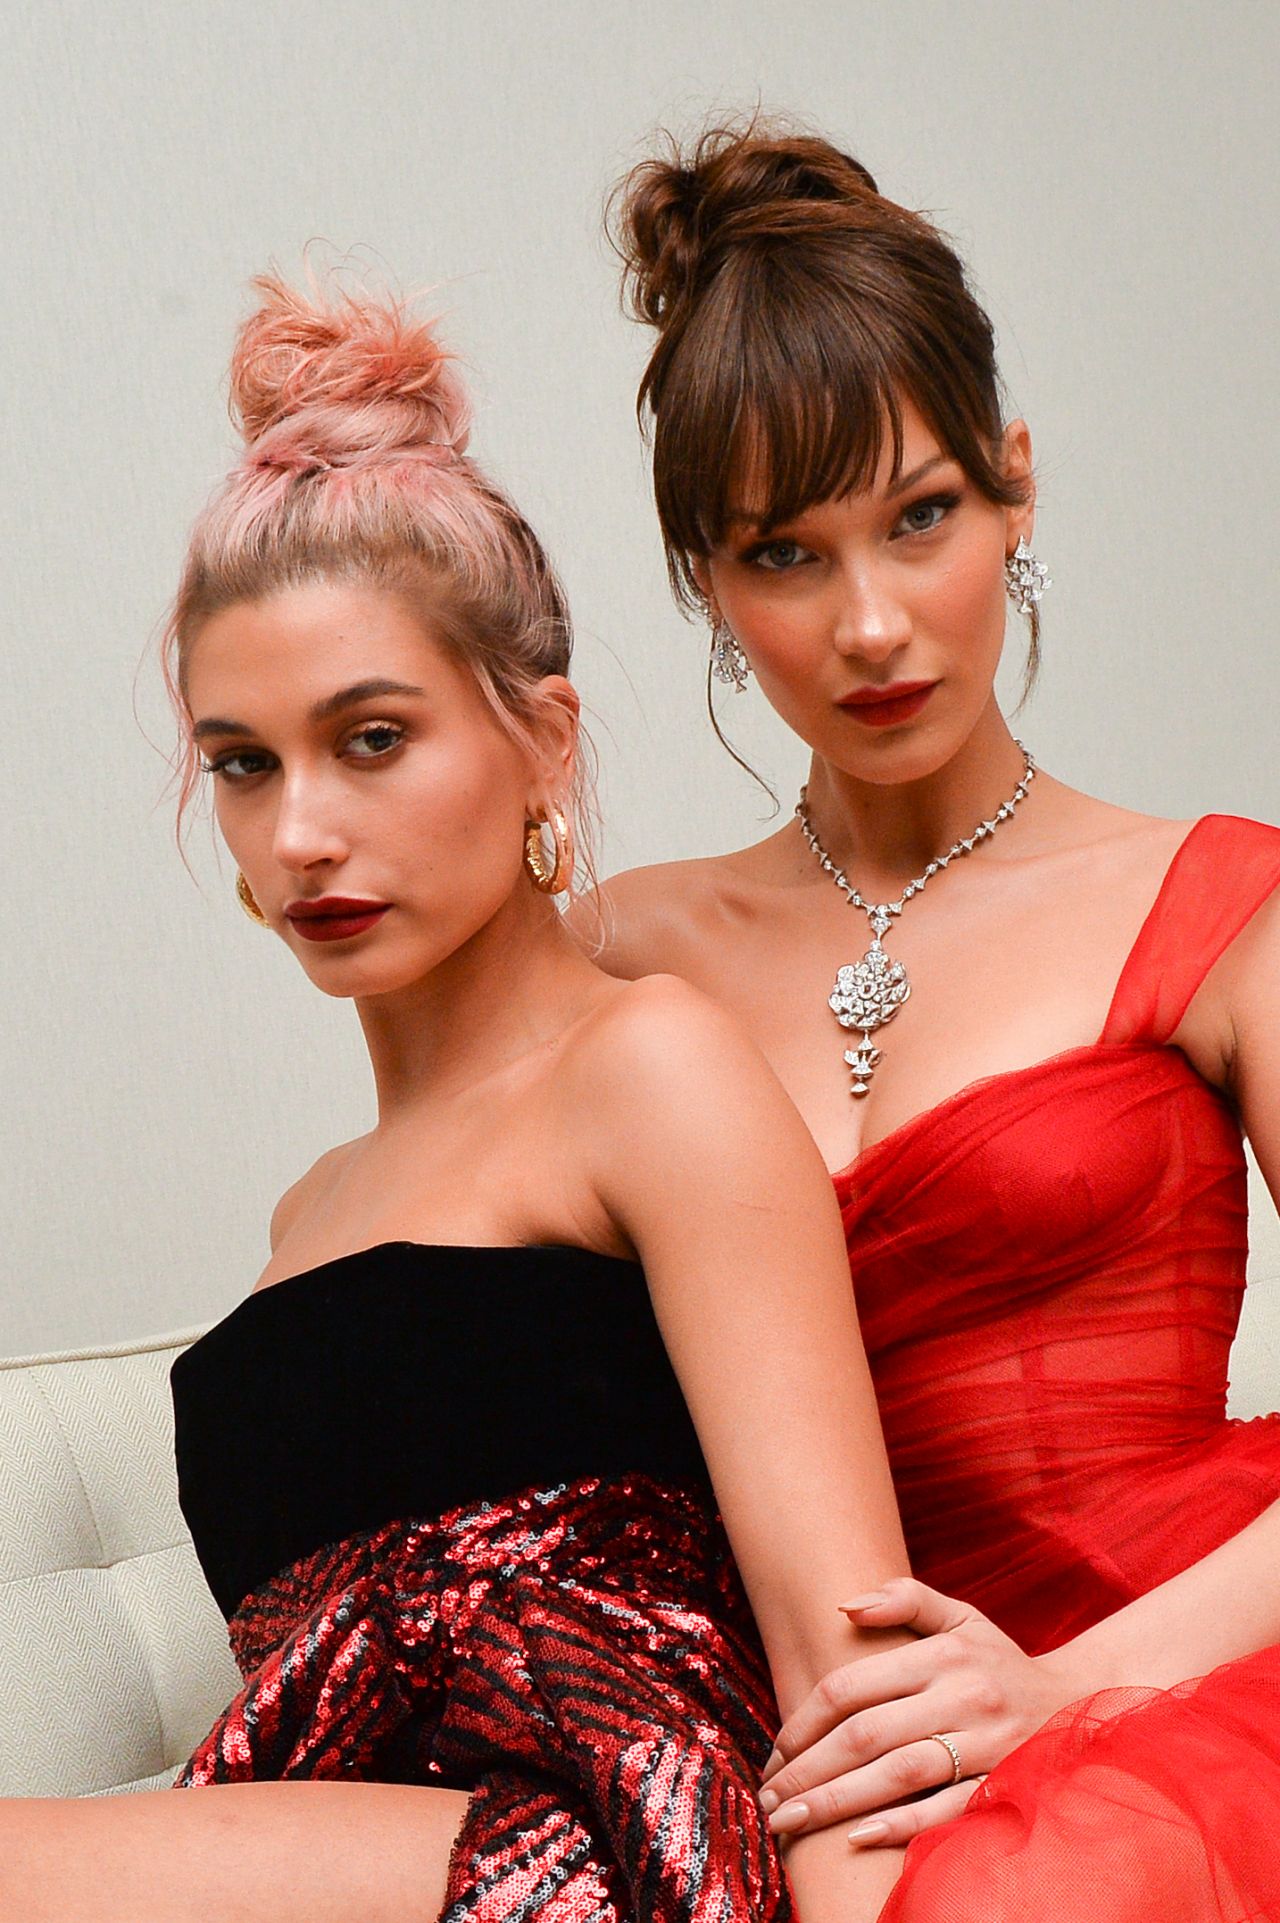 Hailey Baldwin at the Marriott Hotel for the Dior Dinner in Cannes